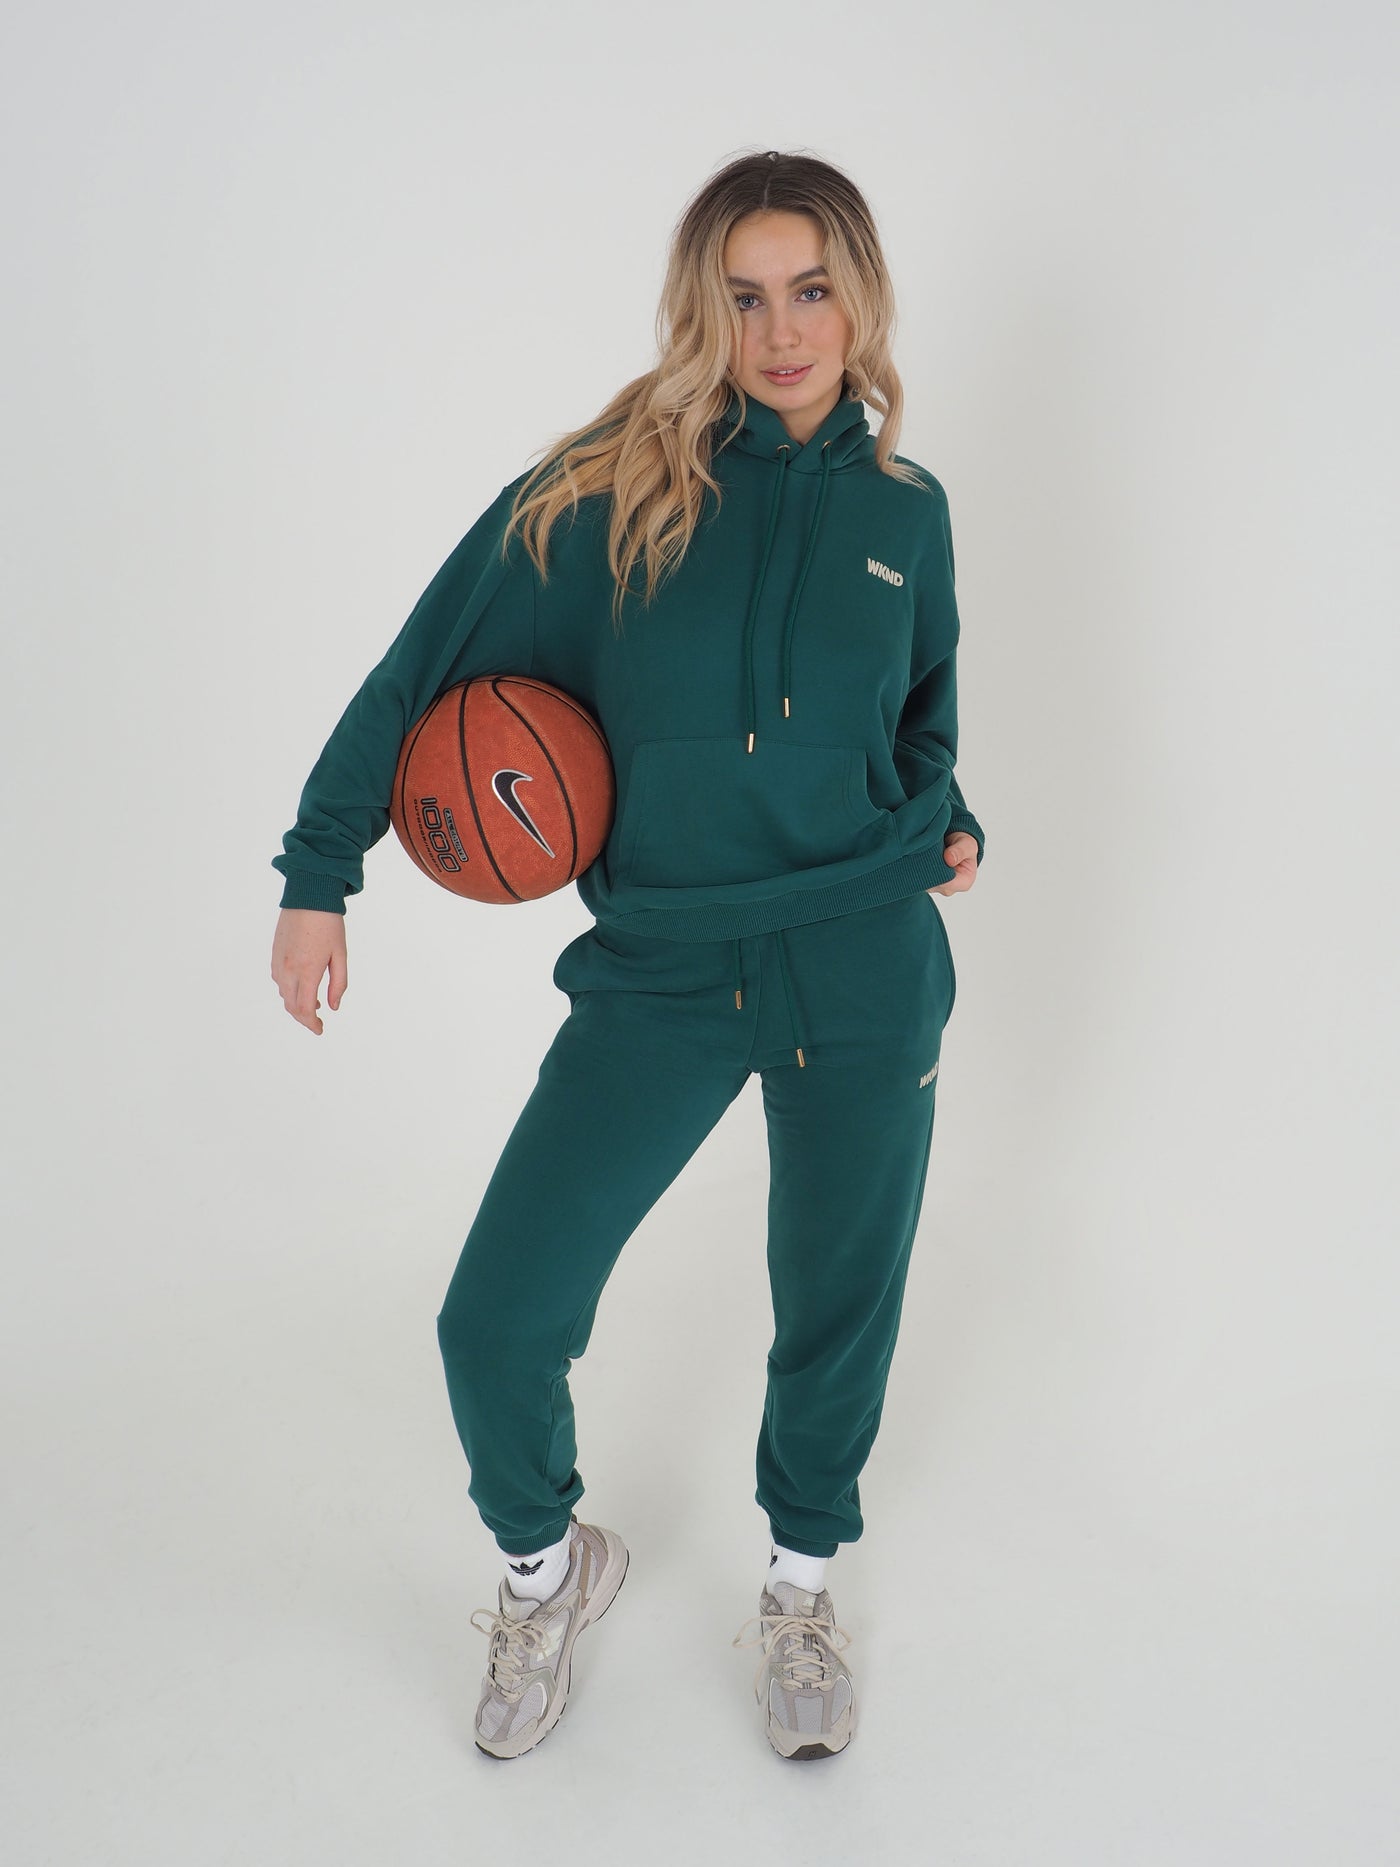 Model is blonde, holding a basketball and wearing matching green hoodie and joggers.